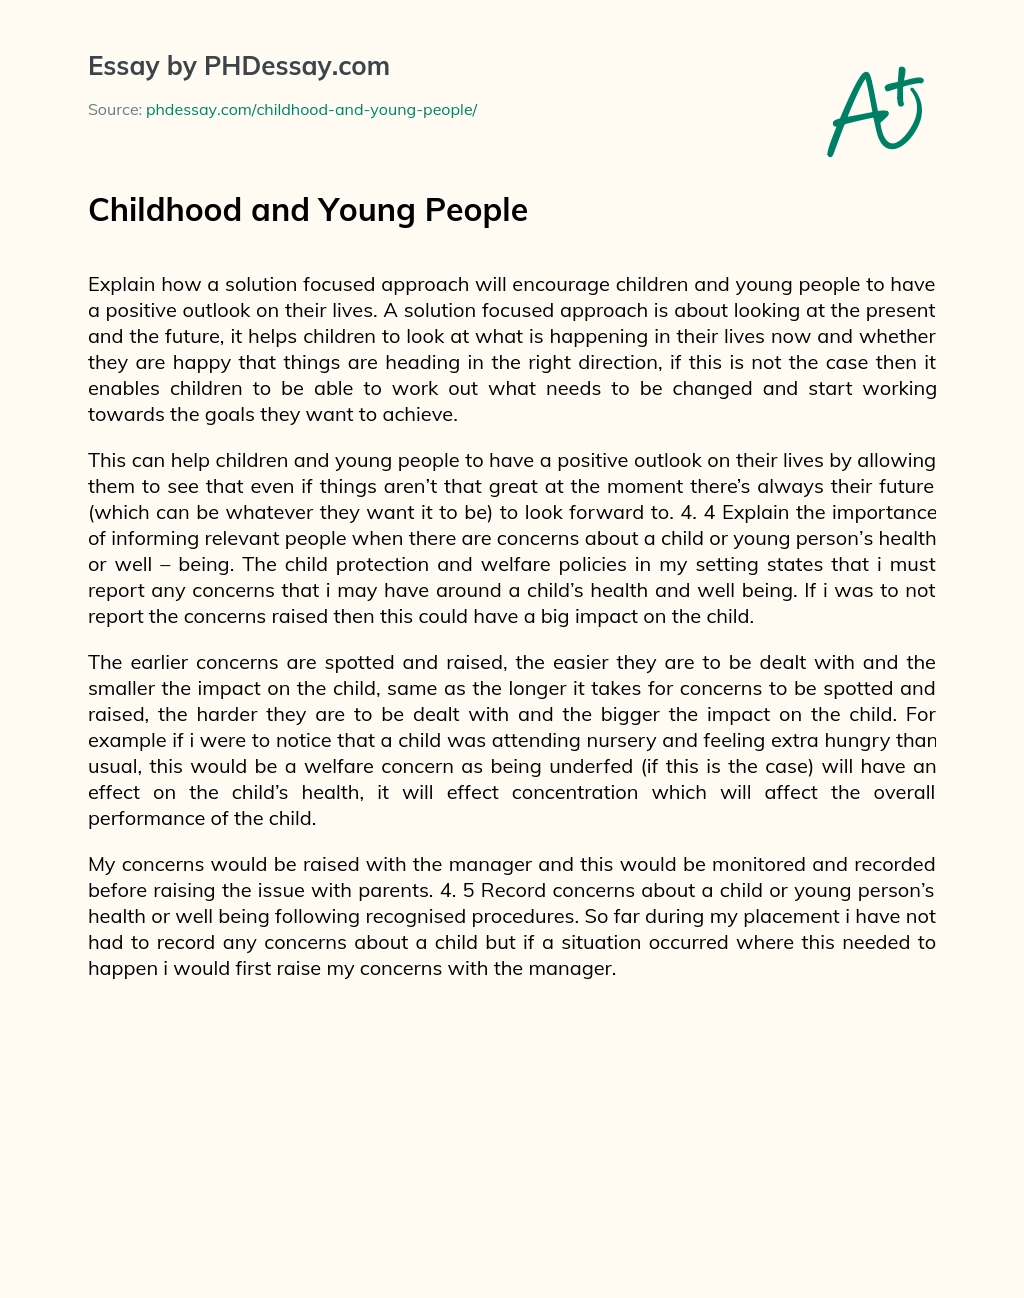 Childhood and Young People essay